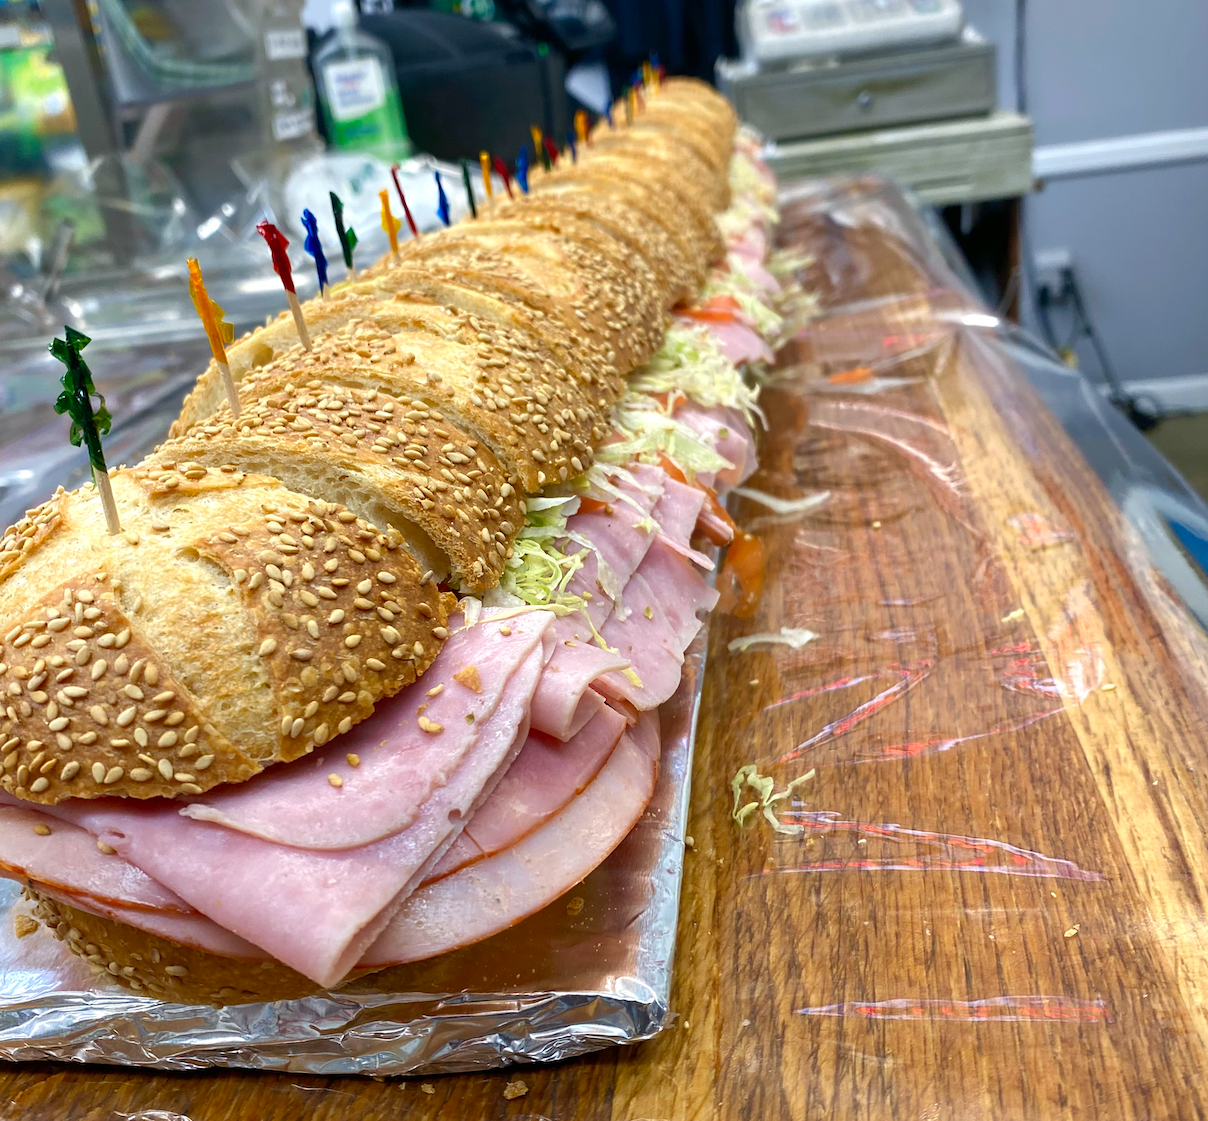 A 6-foot sub from Don's Sandwich Shop.